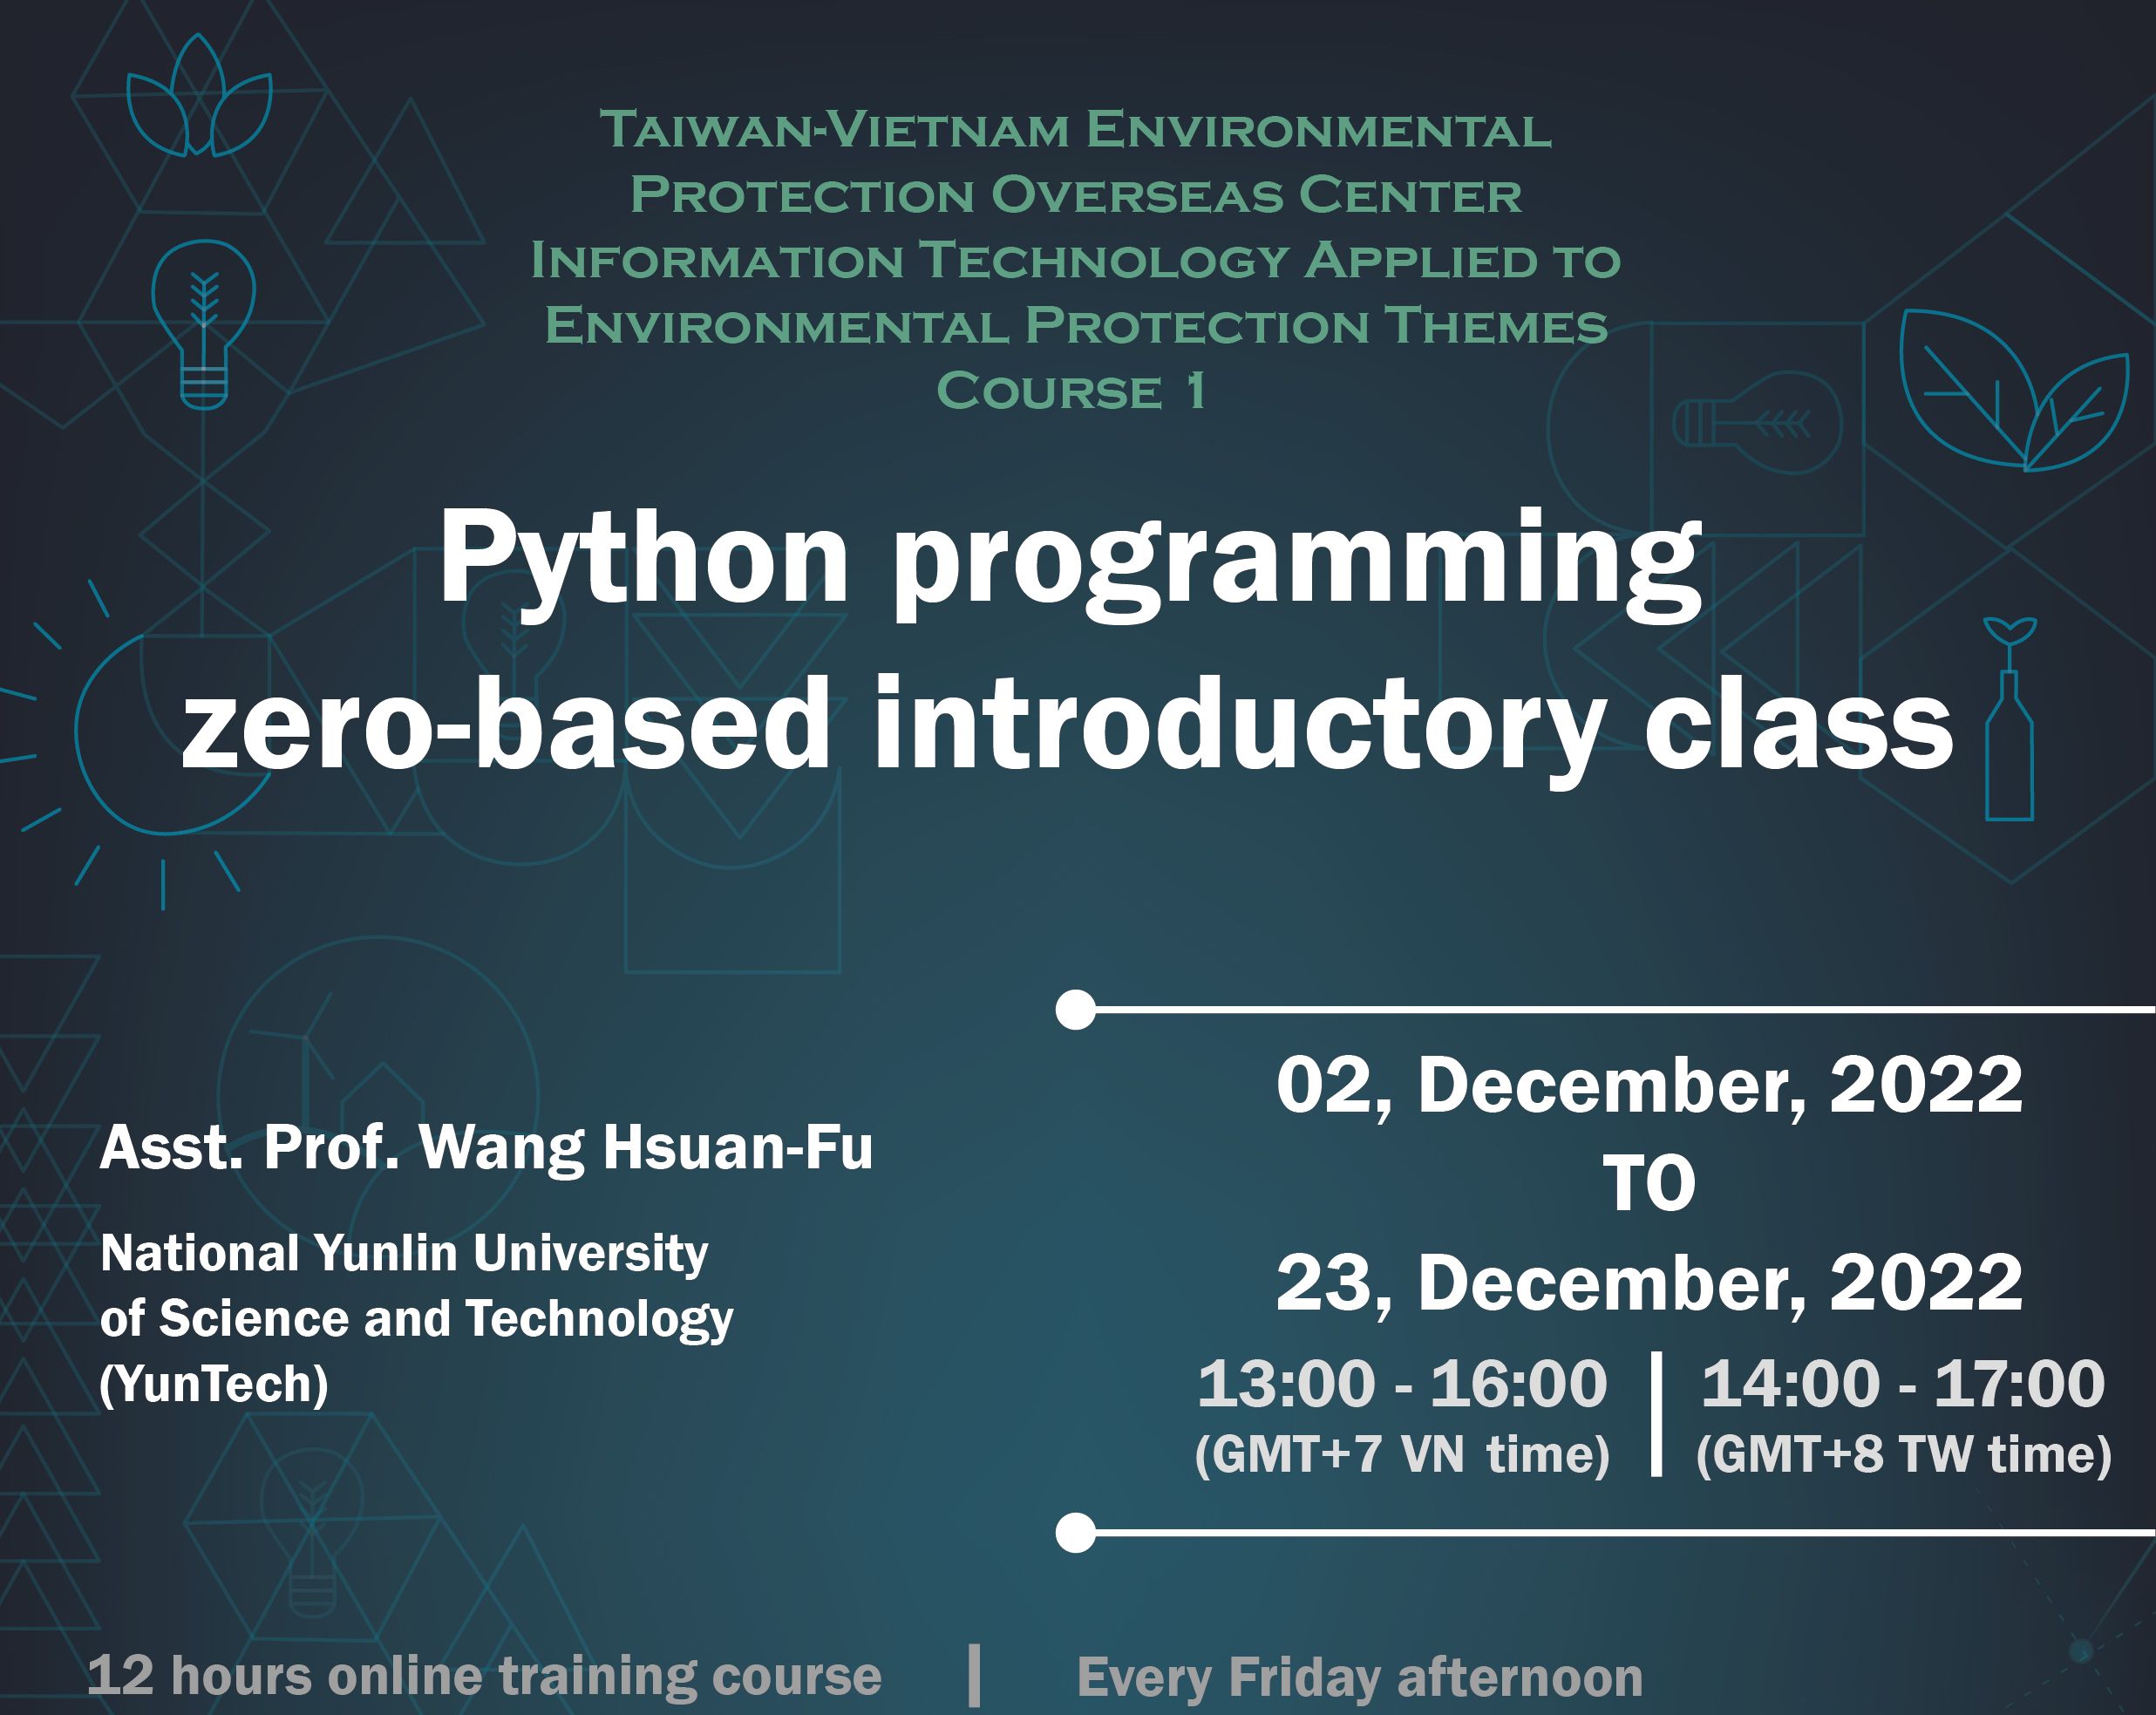 Python programming zero-based introductory class (The course is full)